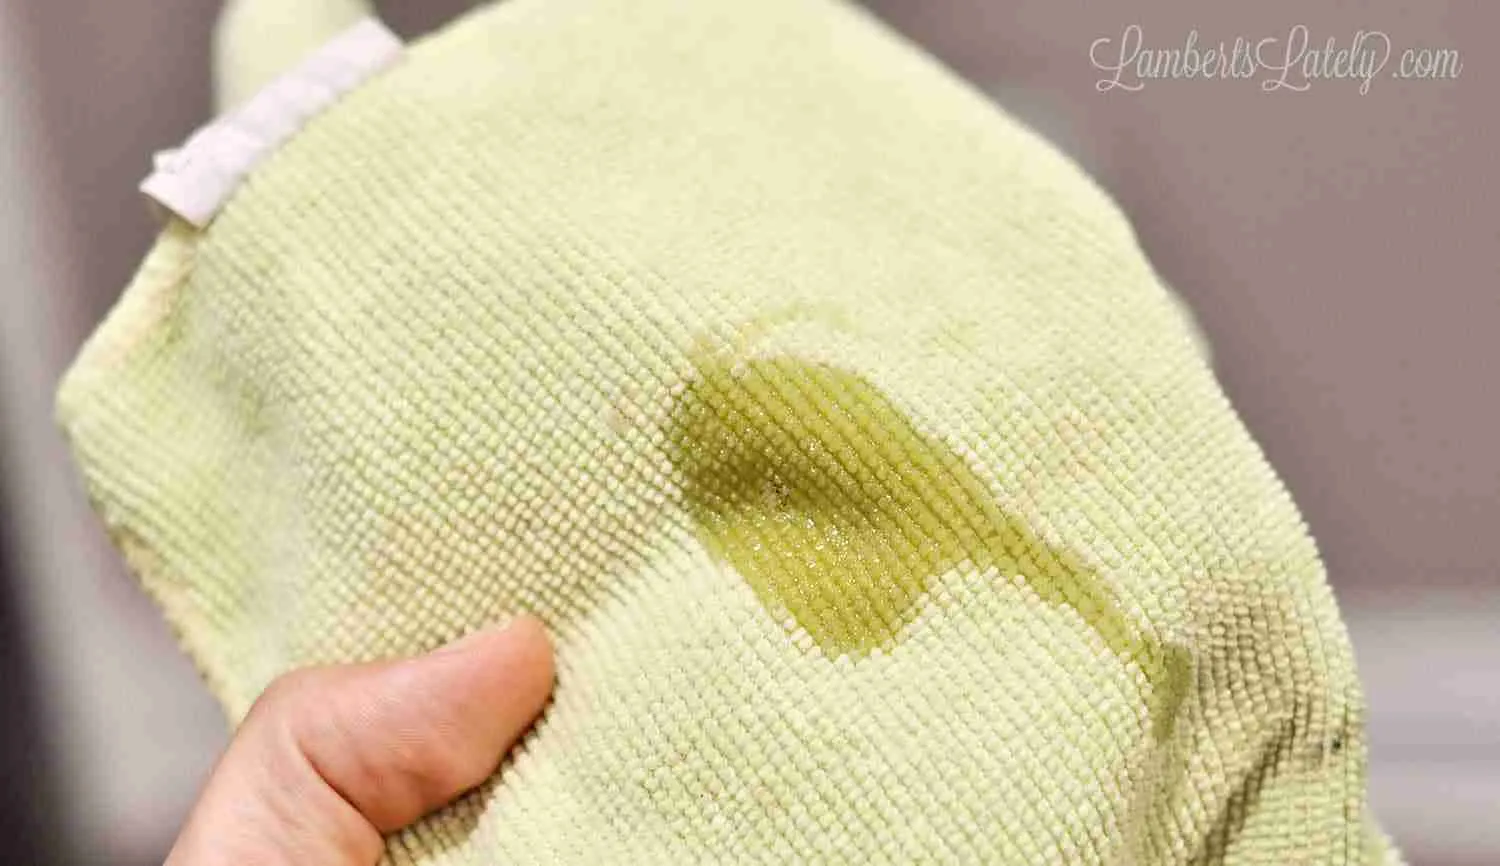 microfiber cloth with a small amount of olive oil